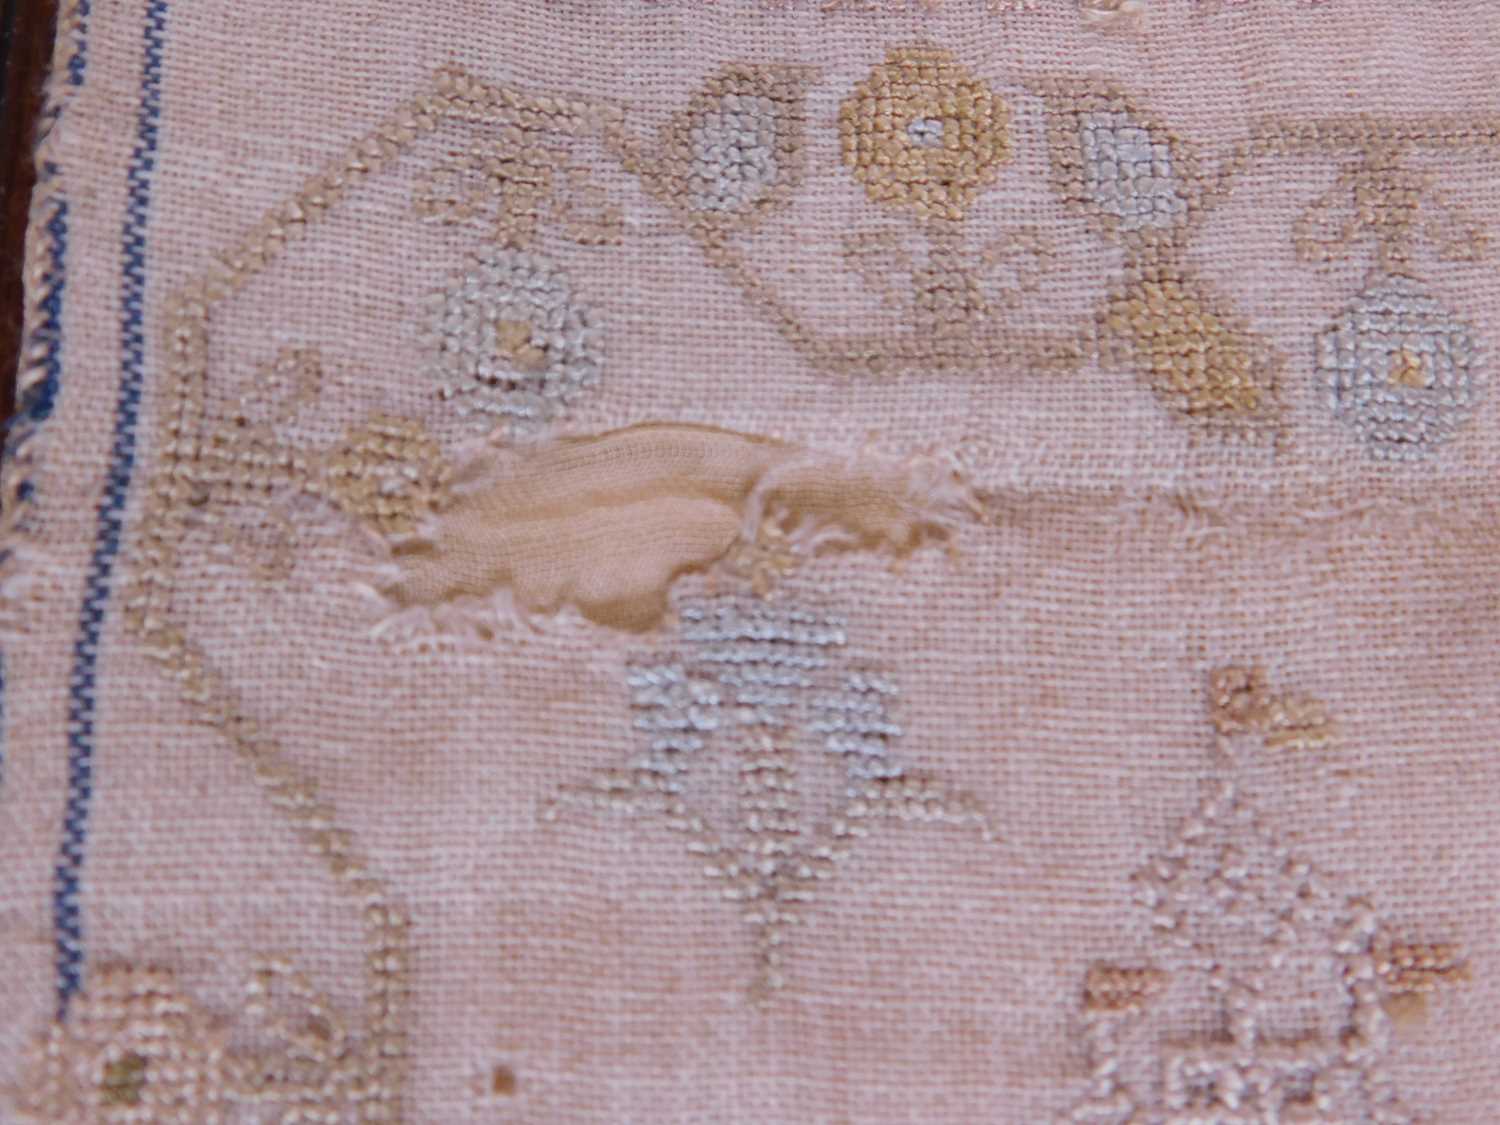 A Georgian needlework sampler, with rows of religious text, animals and buildings, named 'Ann - Image 6 of 6